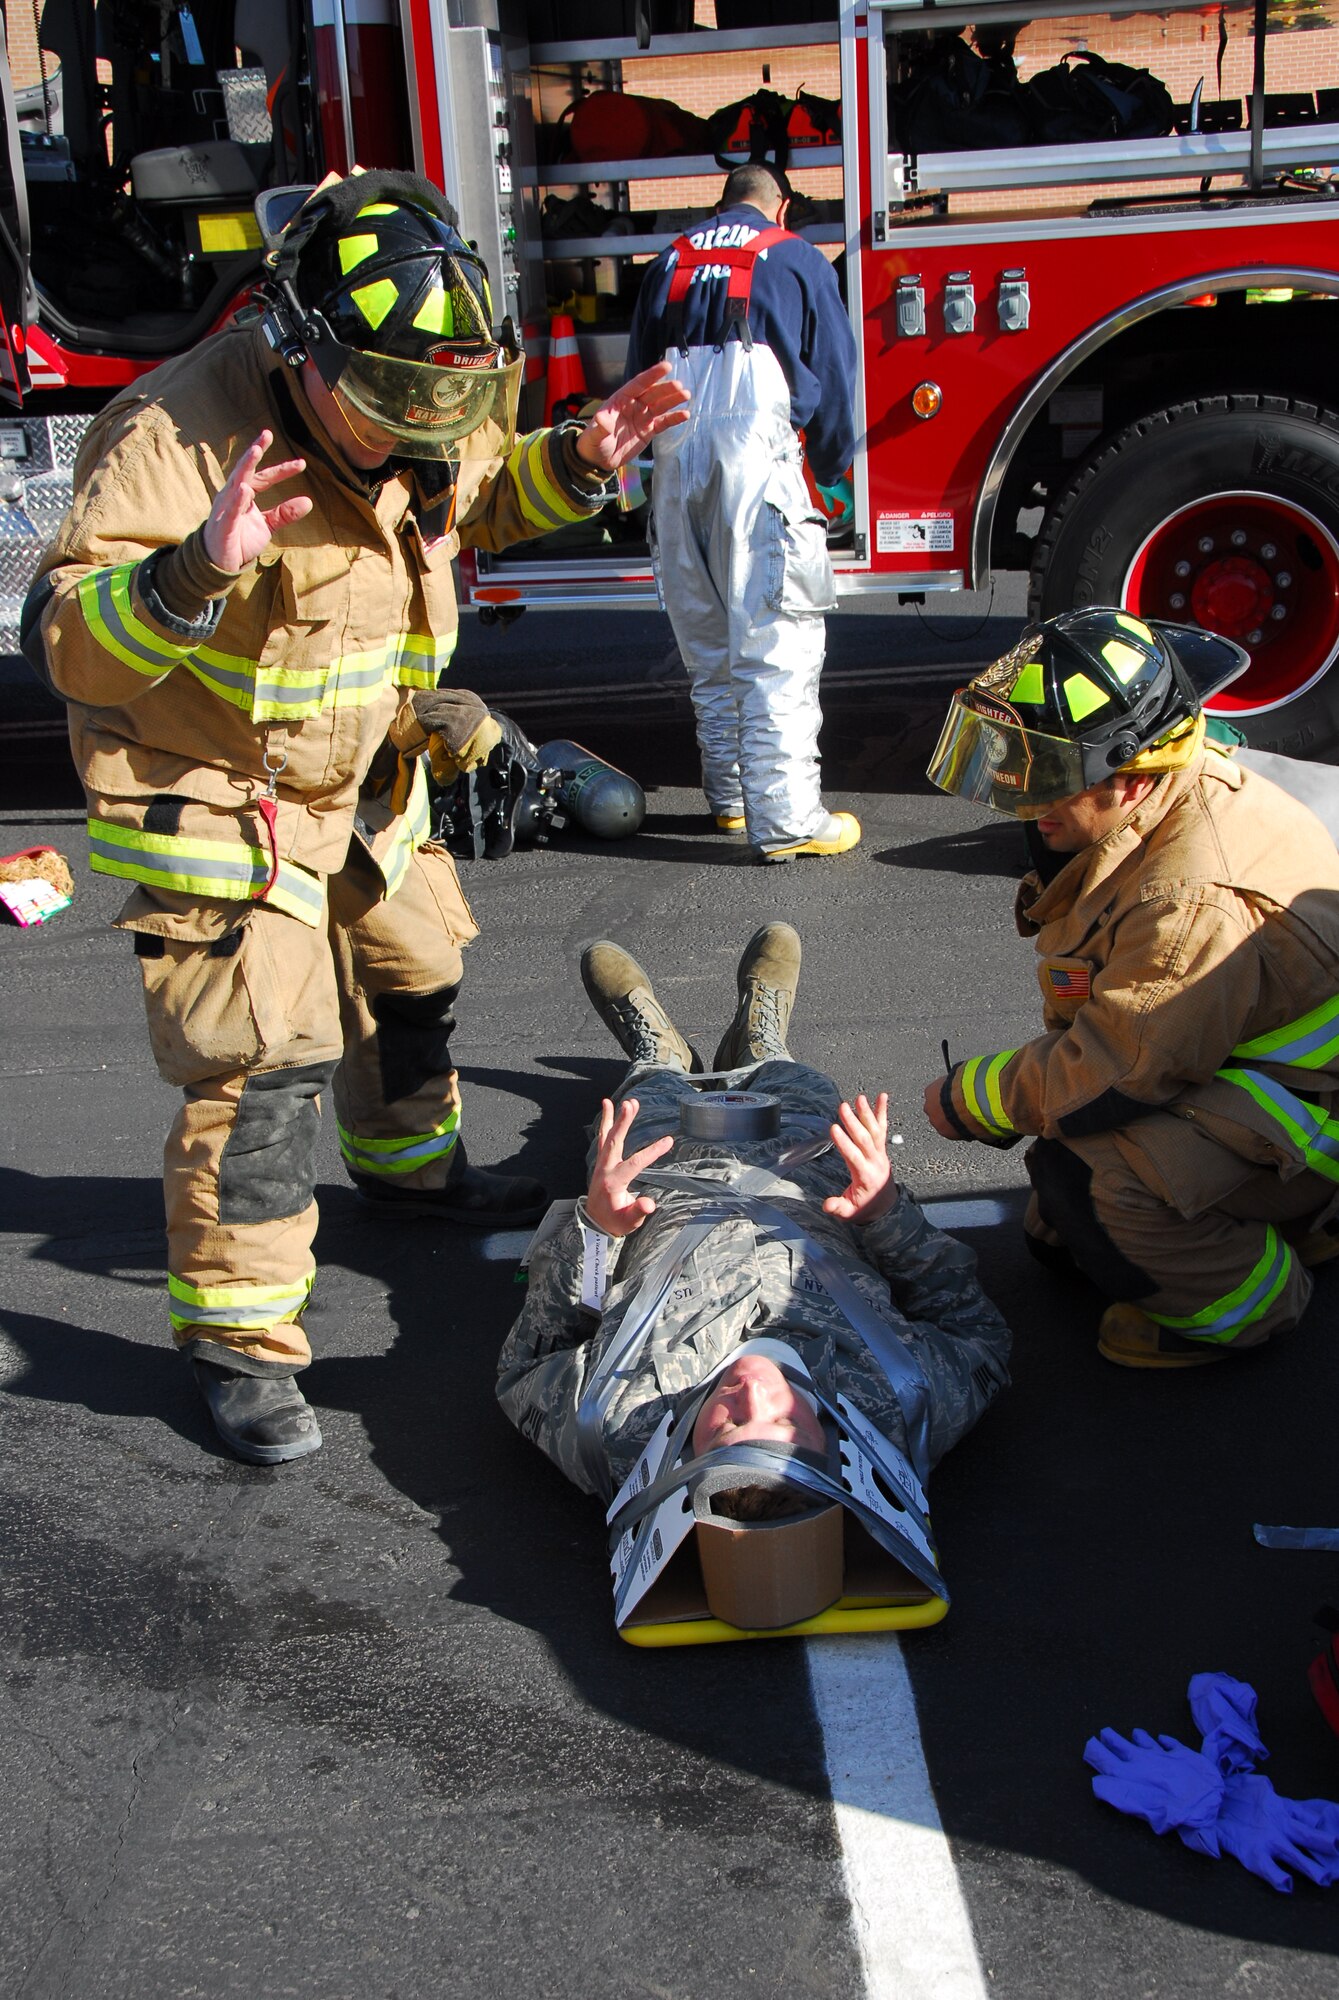 First responders from the base fire station secure an injured Guardsman during a simulated accident March 12 as part of a compliance inspection exercise. The 162nd Fighter Wing at Tucson International Airport is hosting an inspection team from Air Education and Training Command March 10-16. (Air Force photo by Master Sgt. Dave Neve)